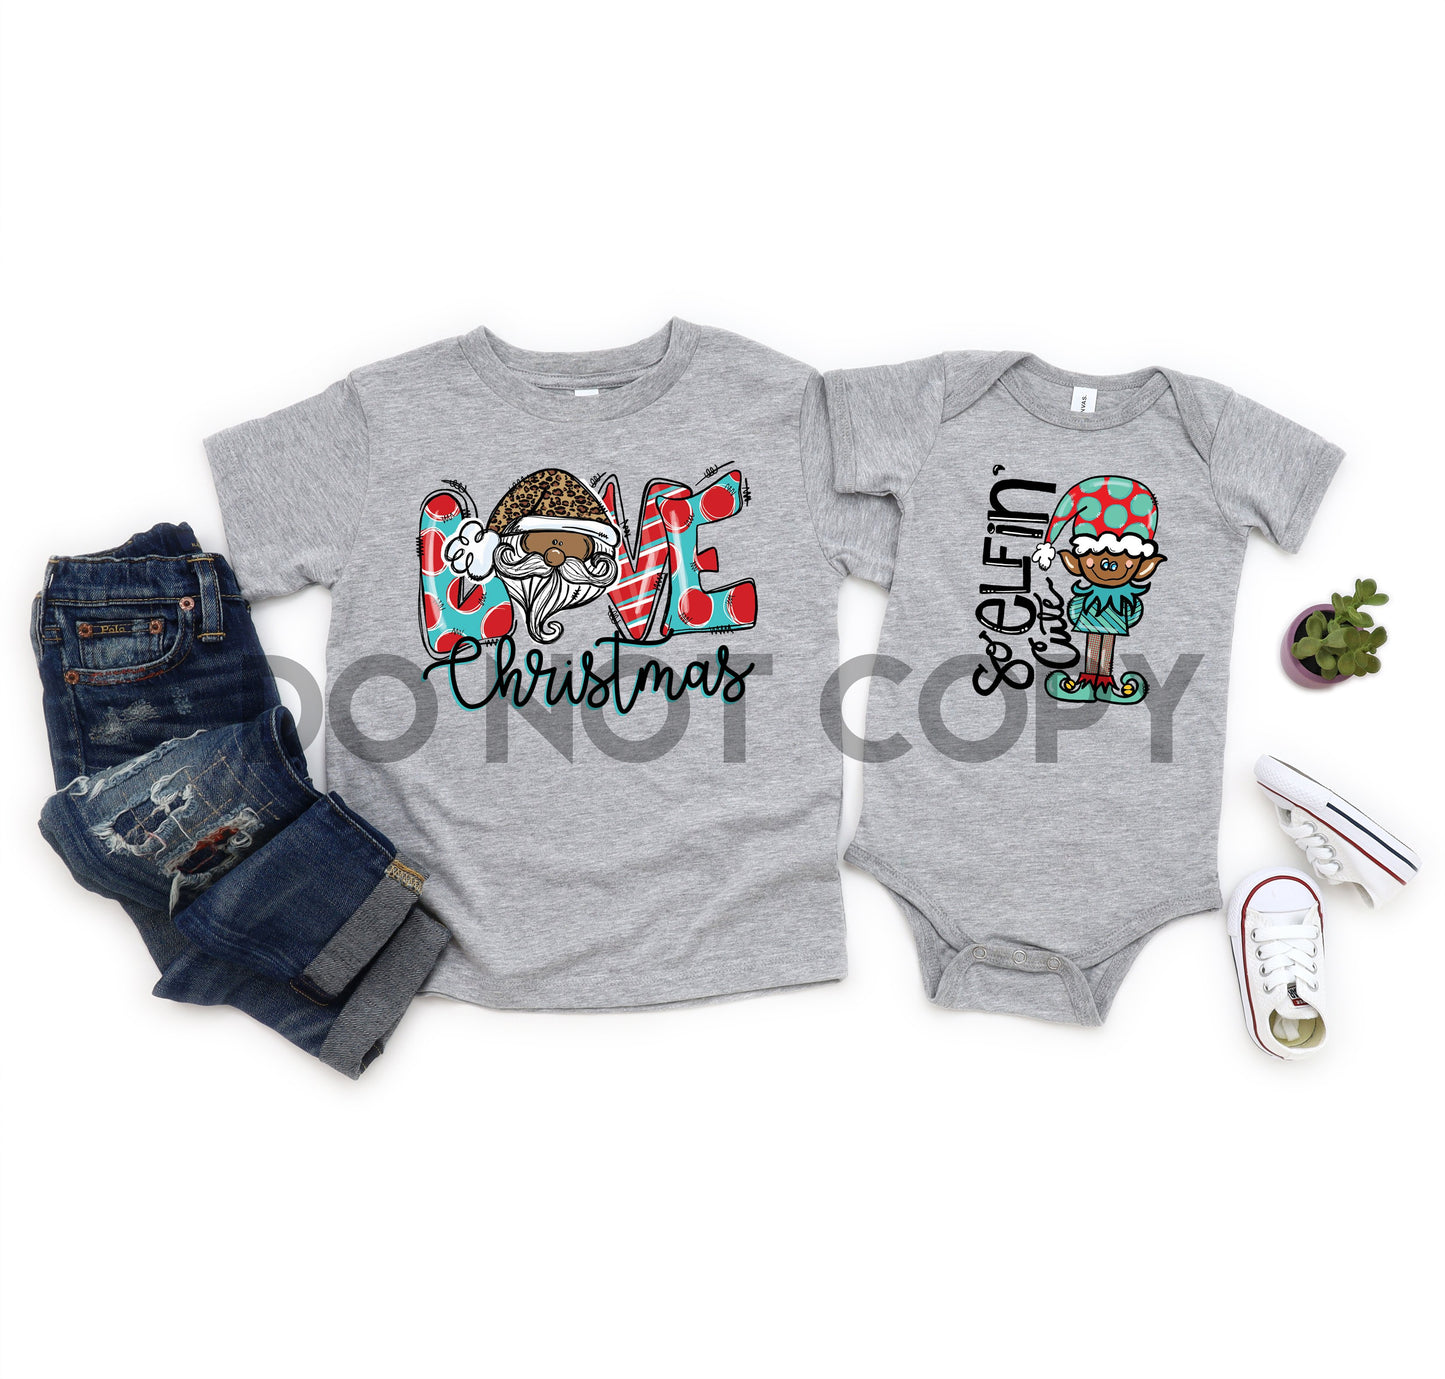 Love Christmas Santa adult infant and youth POC dark complexions HIGH HEAT Full color Screen Print transfer